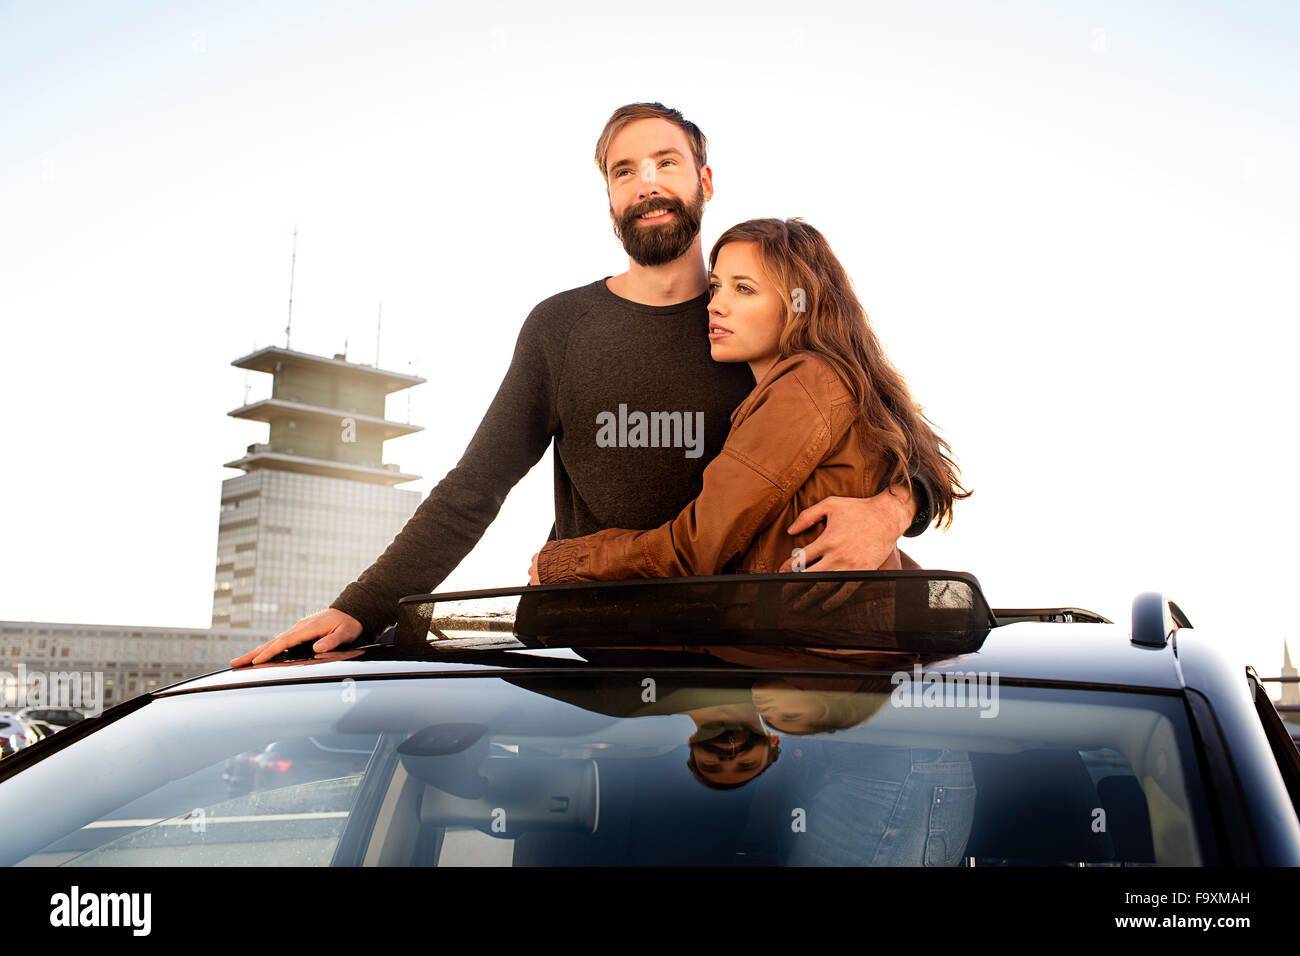 Pin by JoVi Photography on Couples - Sensual ideas | Couple in car, Quirky  couple, Couples poses for pictures